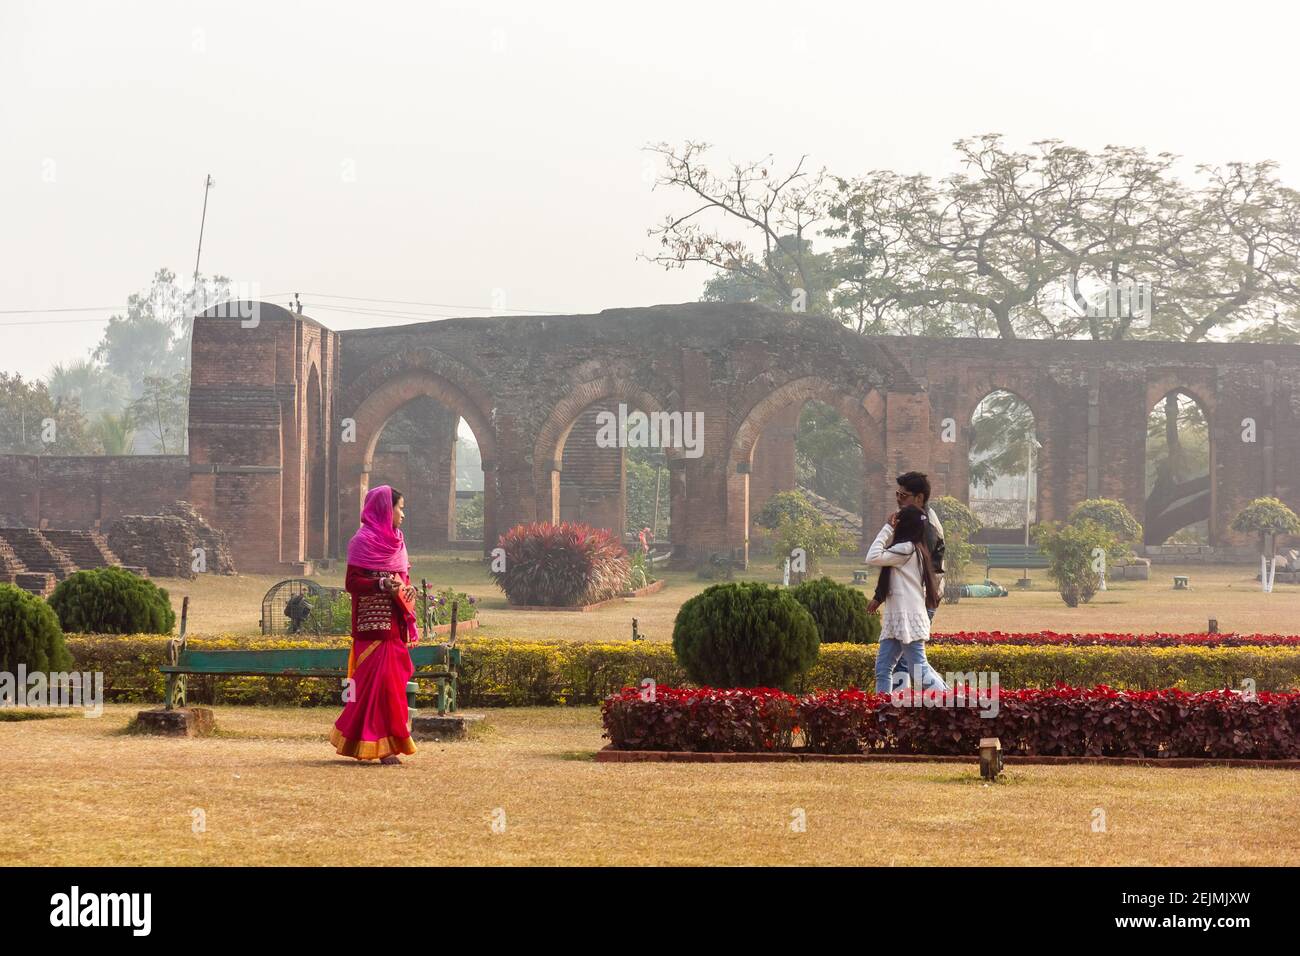 Malda, West Bengal, India - January 2018: Tourists walking in the gardens of the ancient ruins of the Adina Masjid mosque in the village of Pandua. Stock Photo